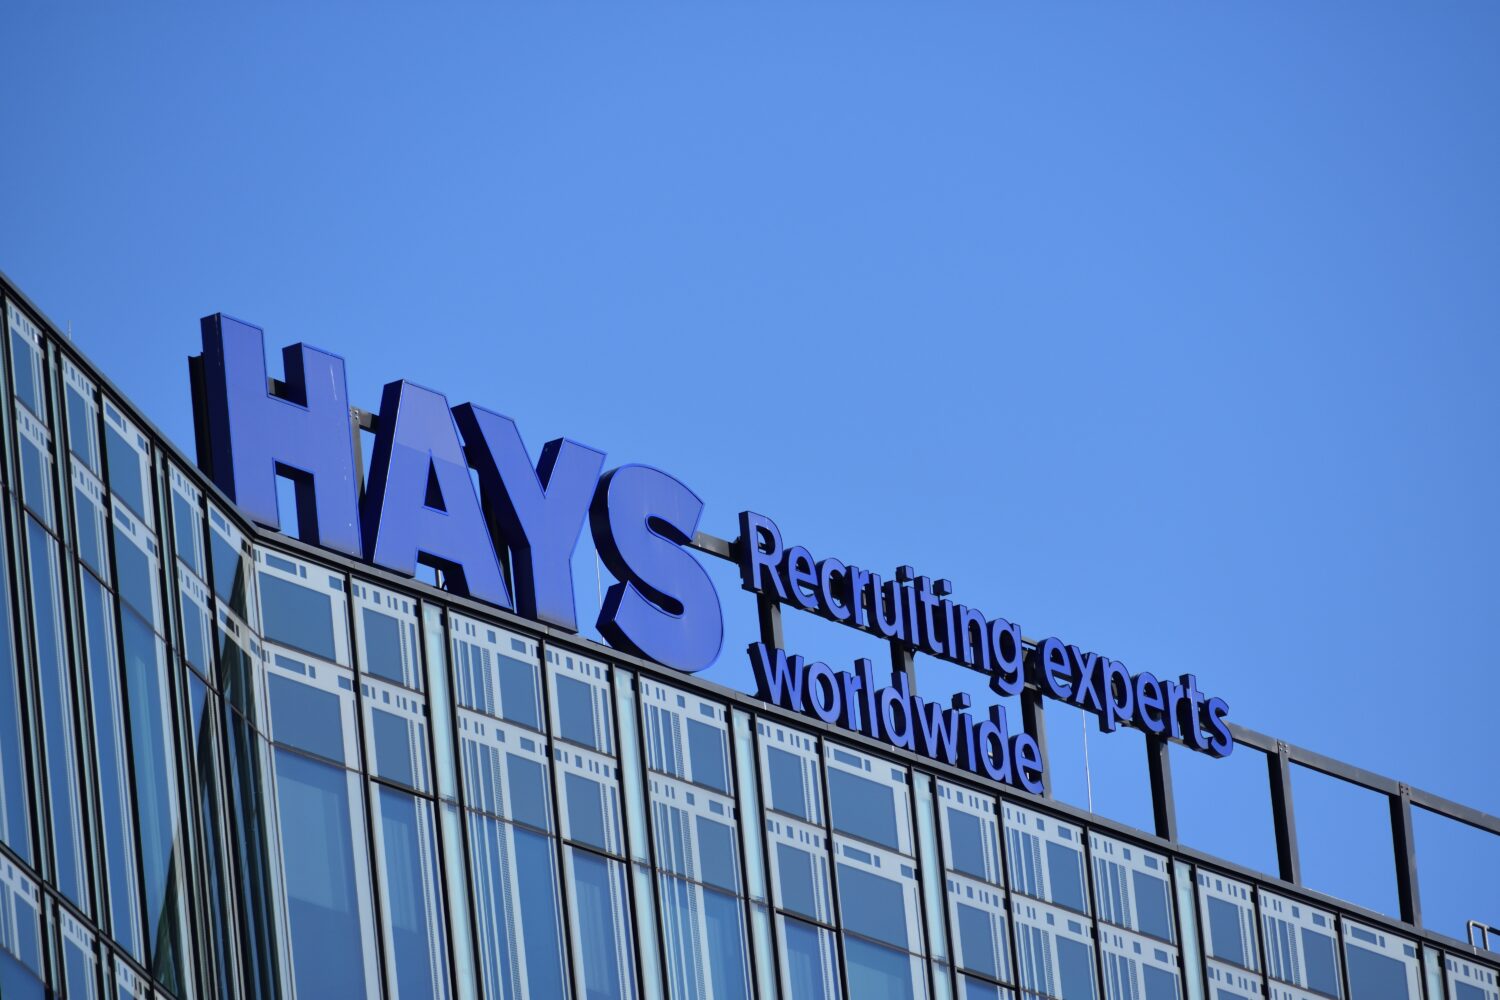 Hays is pioneering the global recruitment business with new technologies